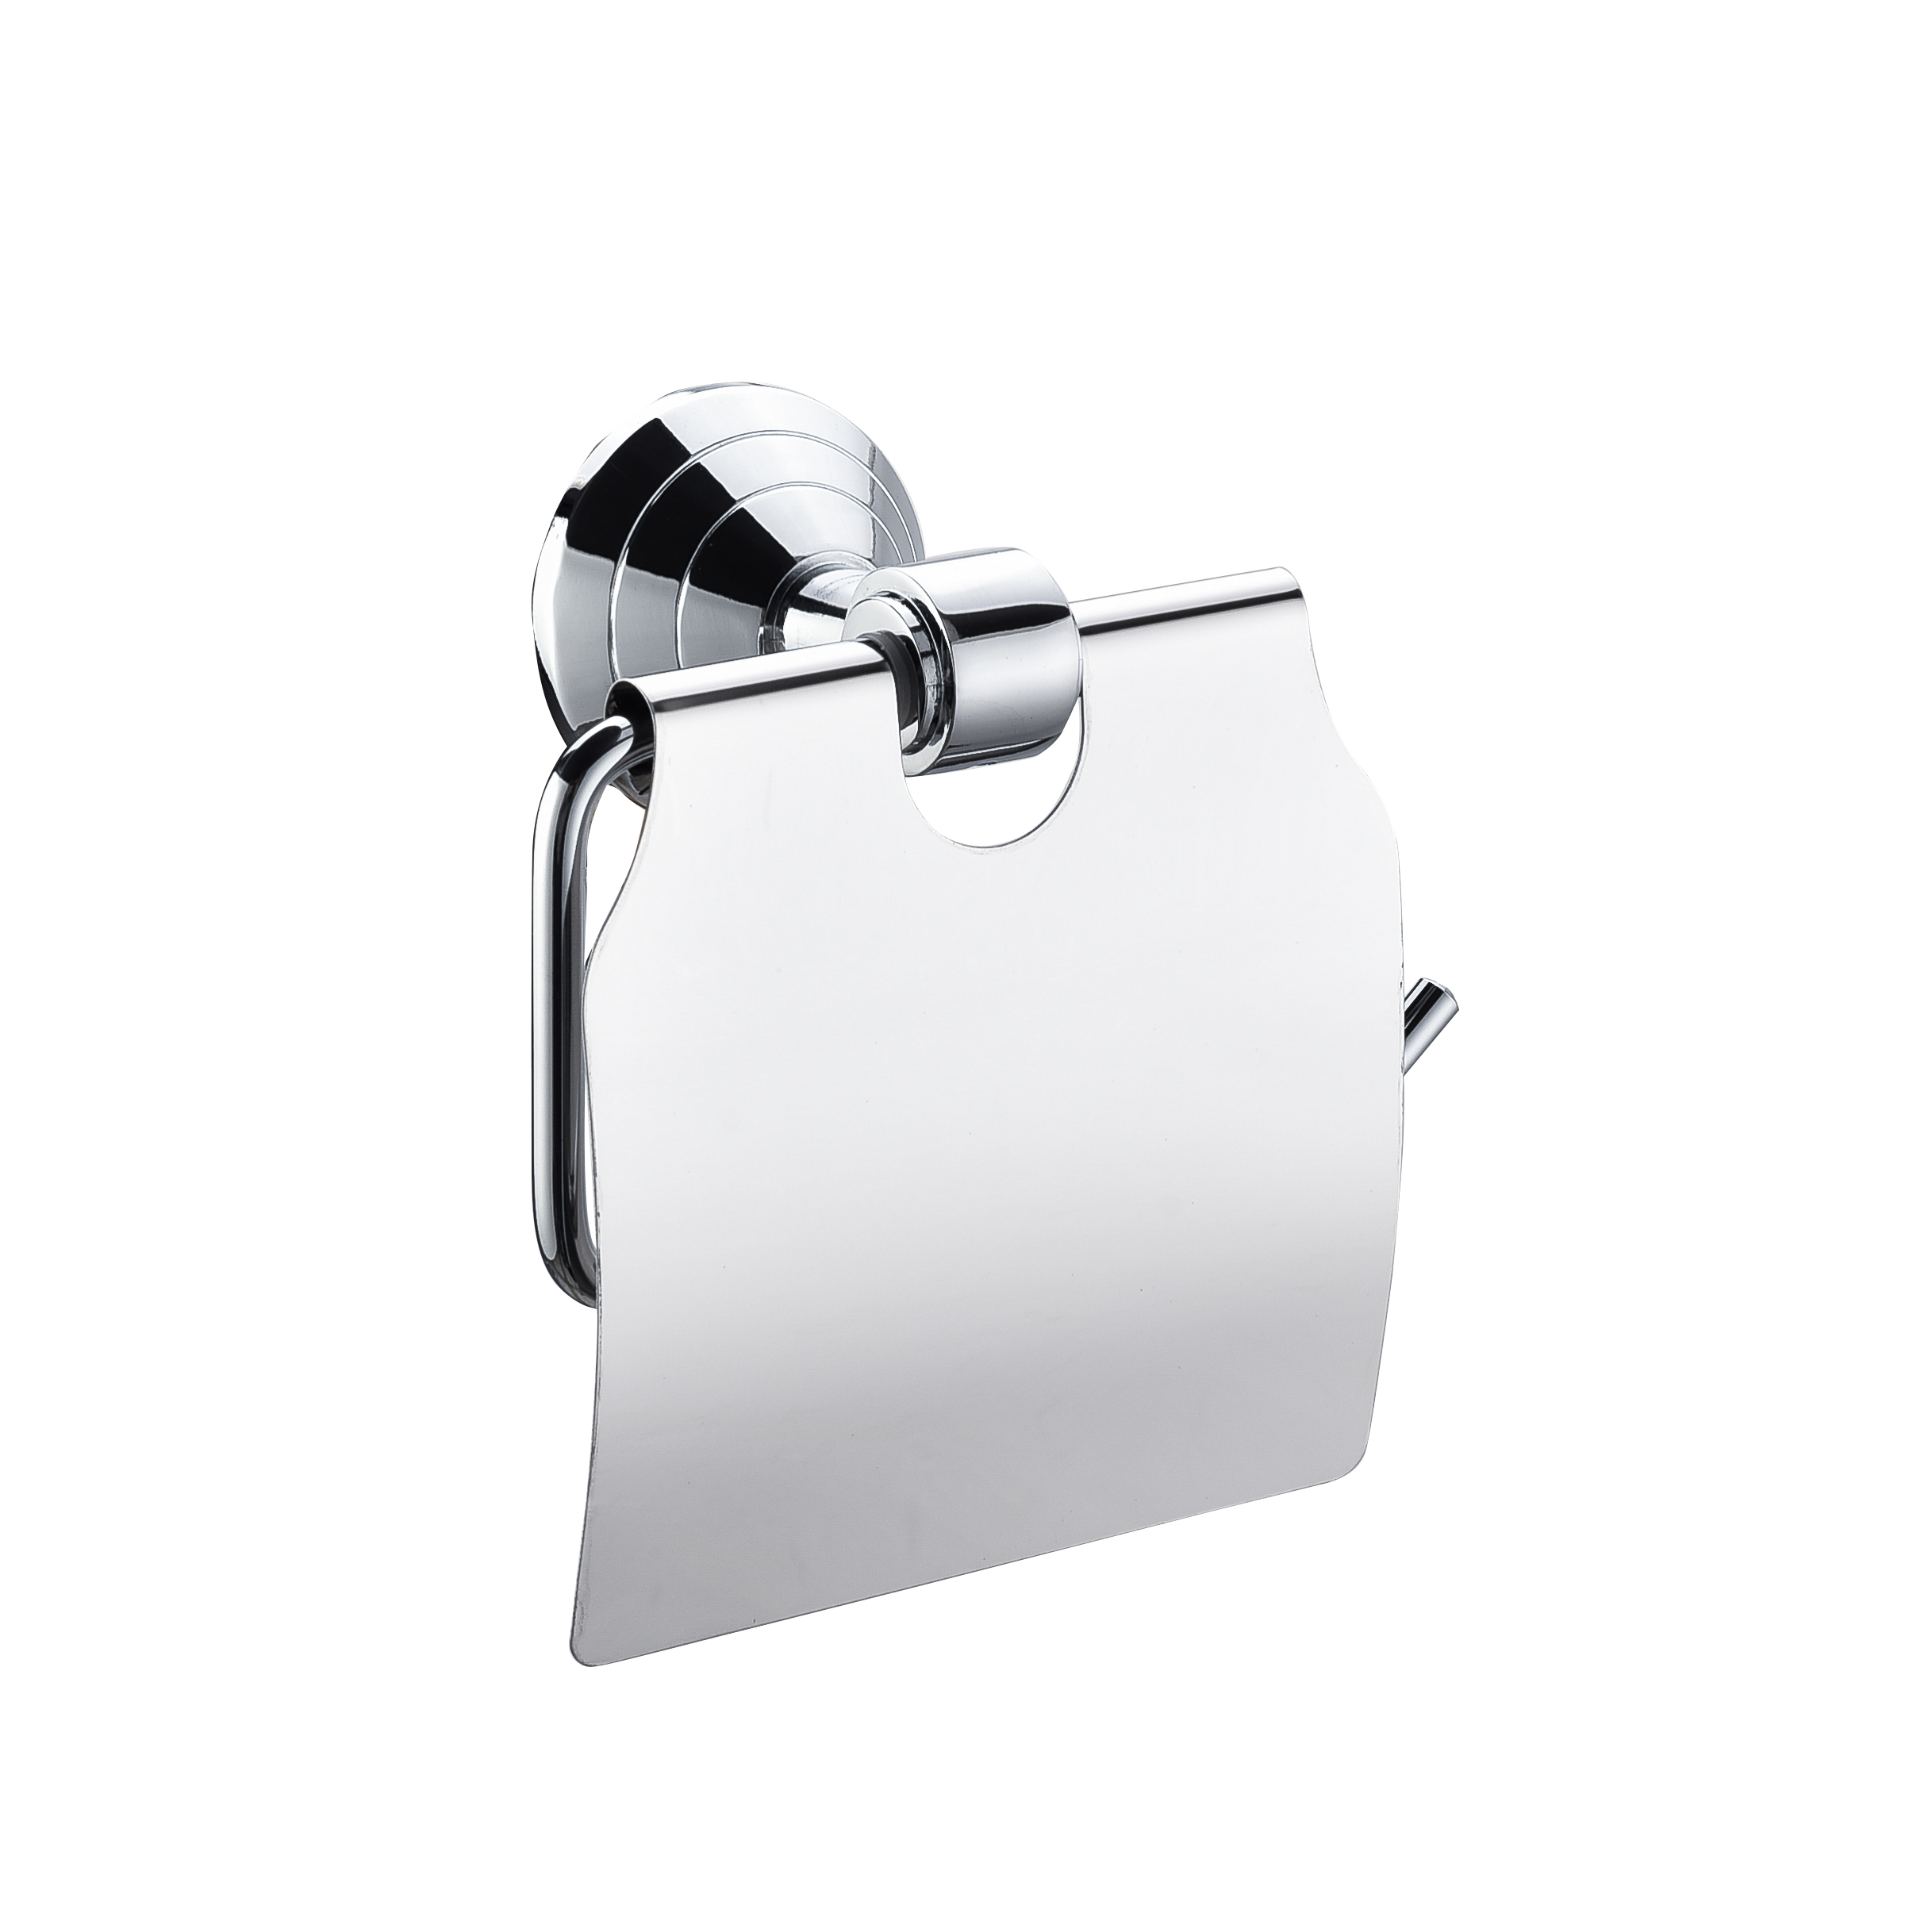 Texture Design Zinc Tissue Holder Chrome Brushed Finished Paper Holder with Cover13206